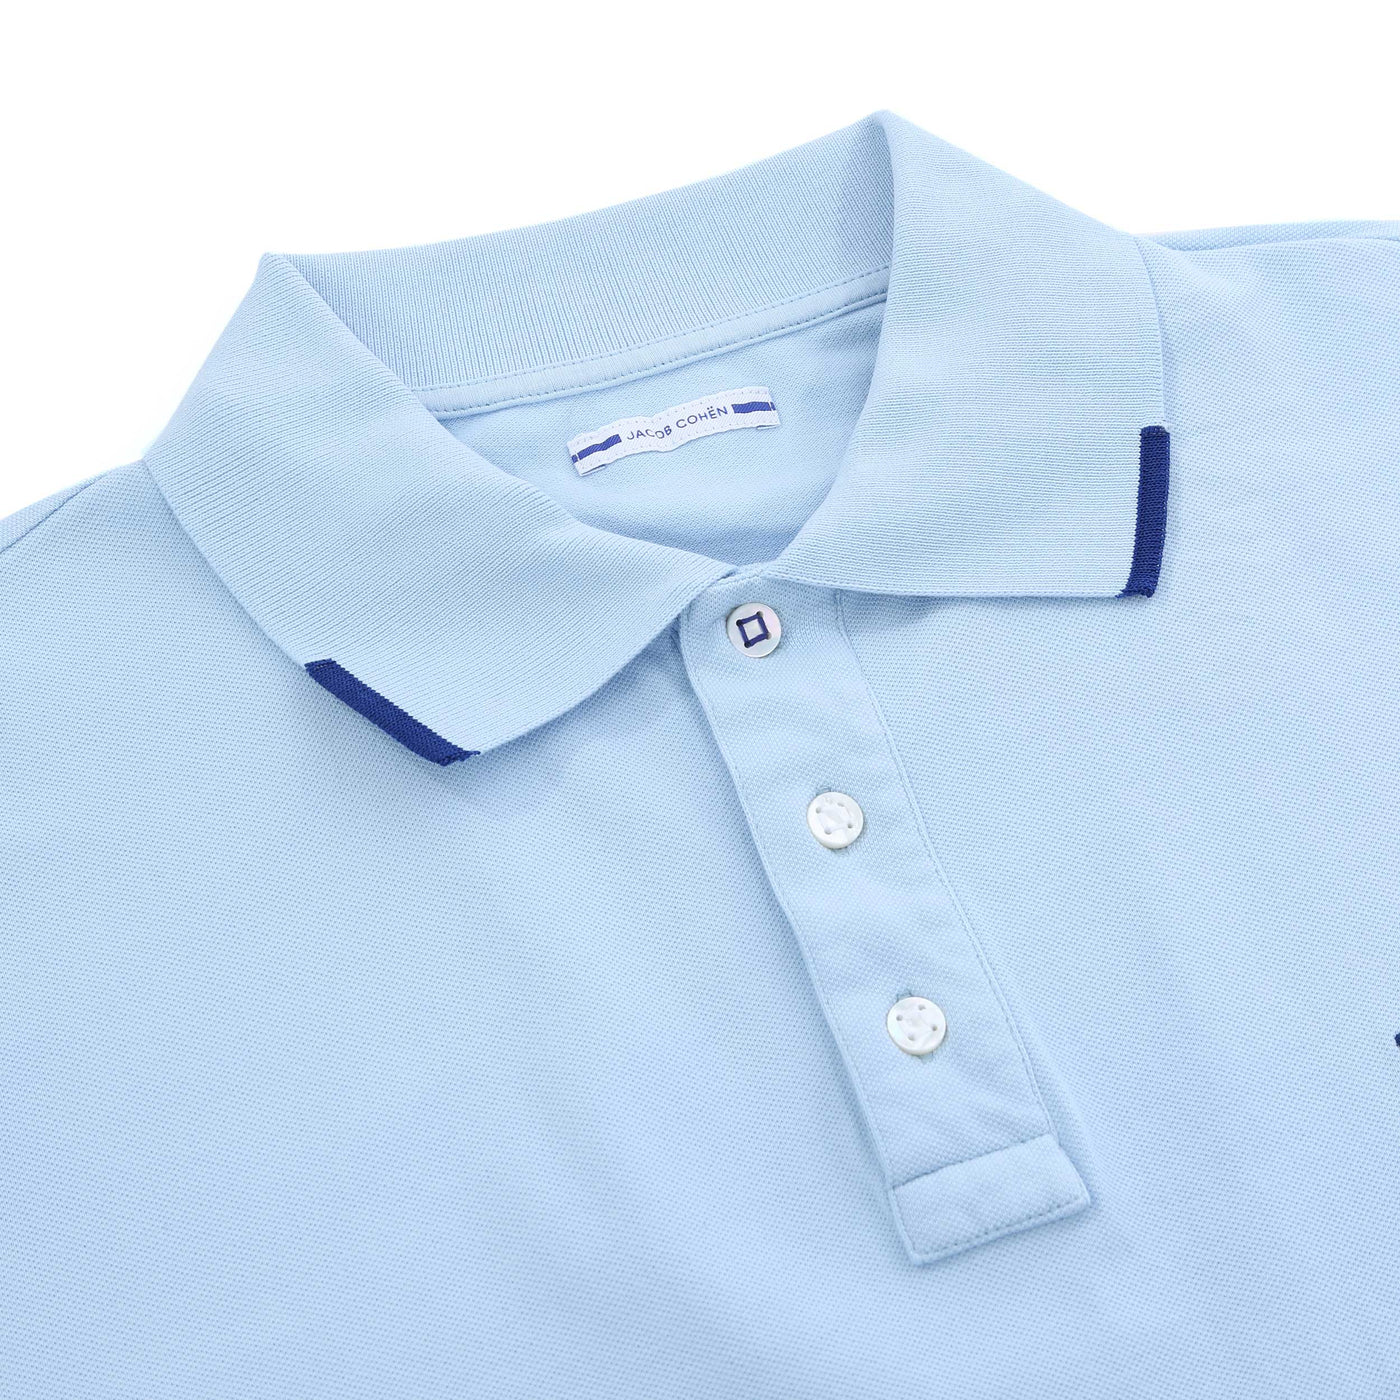 Jacob Cohen Tipped Polo Shirt in Sky Blue CollarJacob Cohen Tipped Polo Shirt in Sky Blue Collar